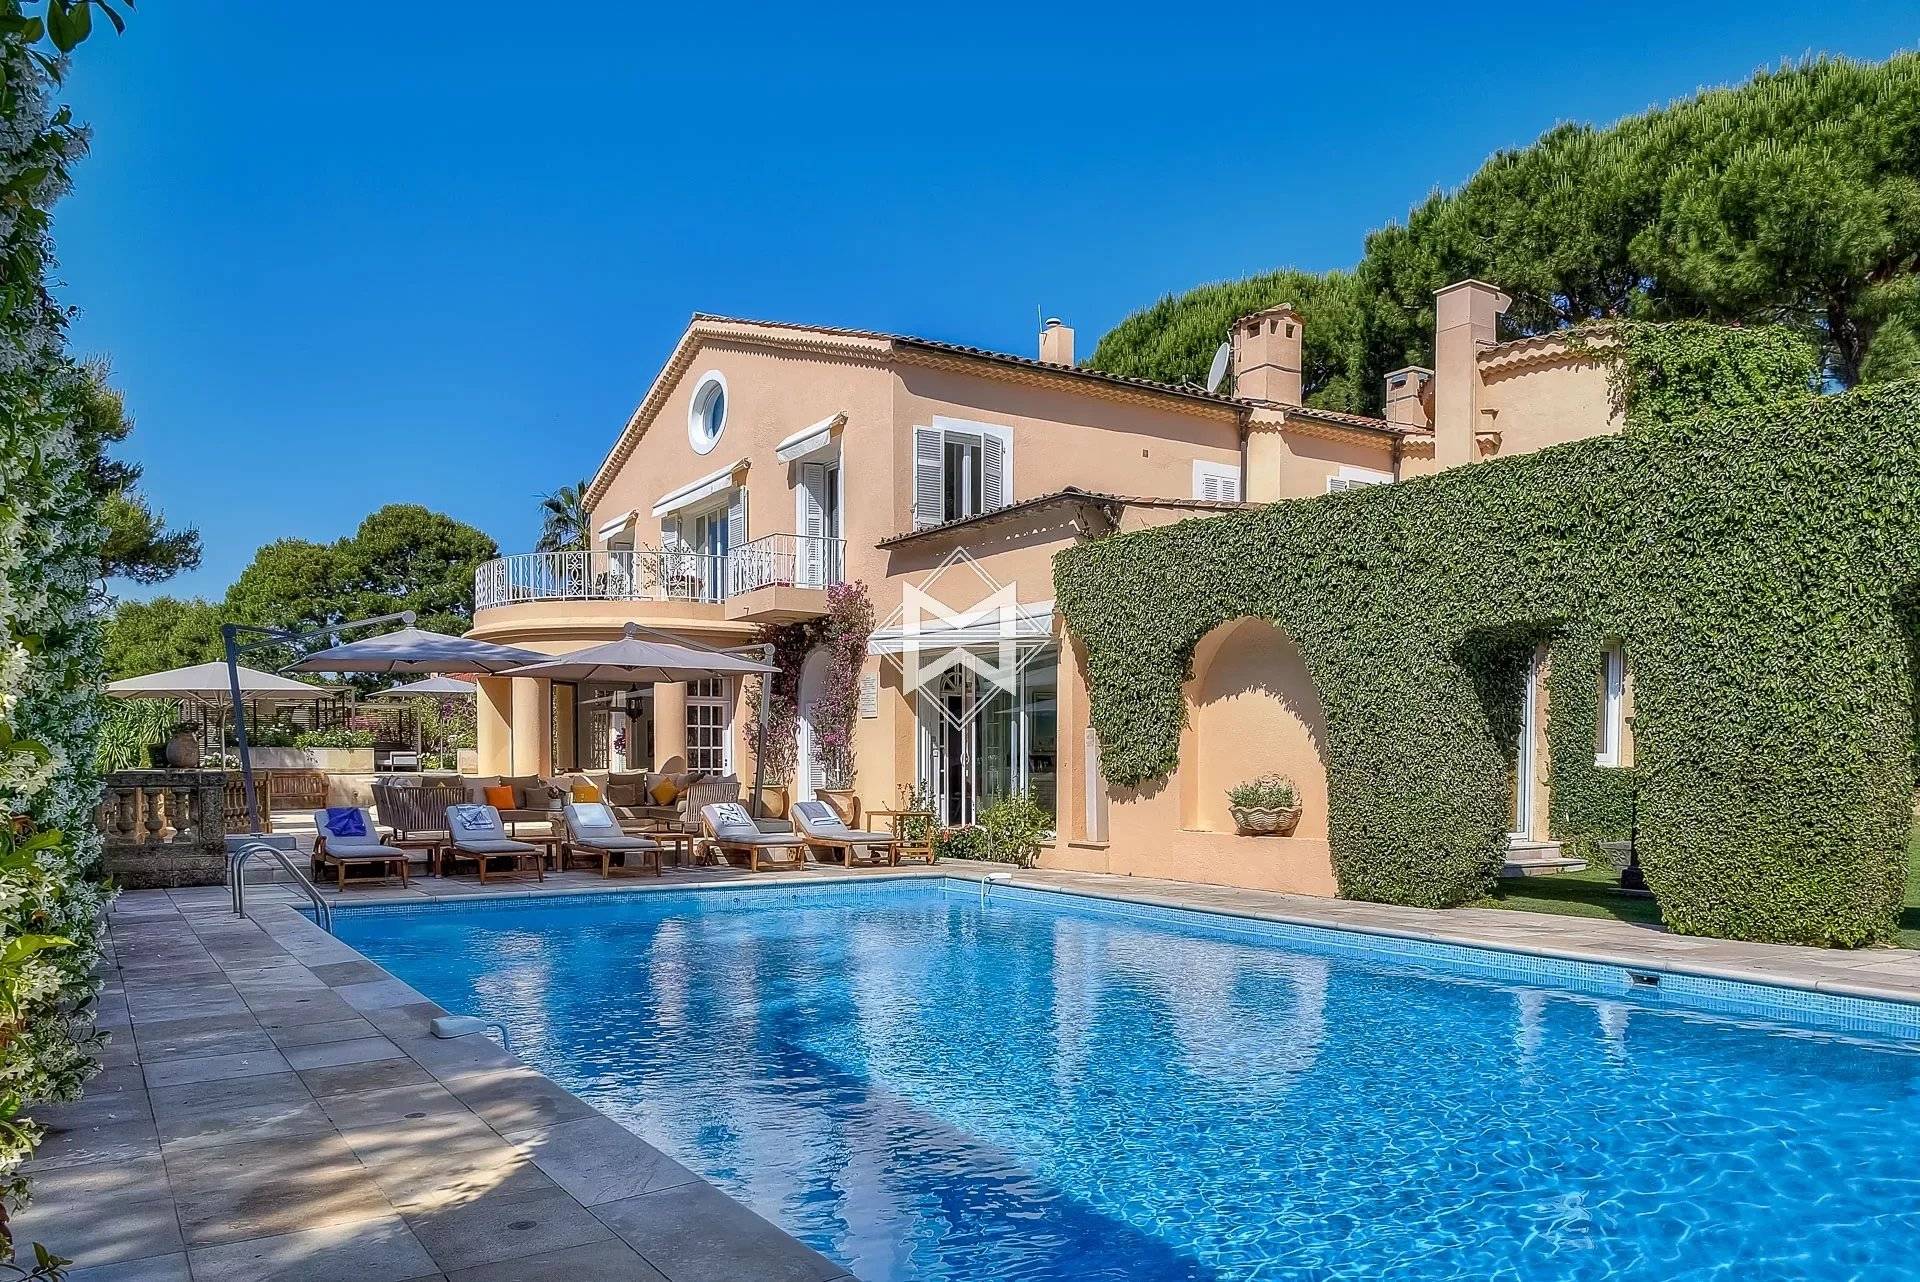 Property next to the Grand Hotel du Cap